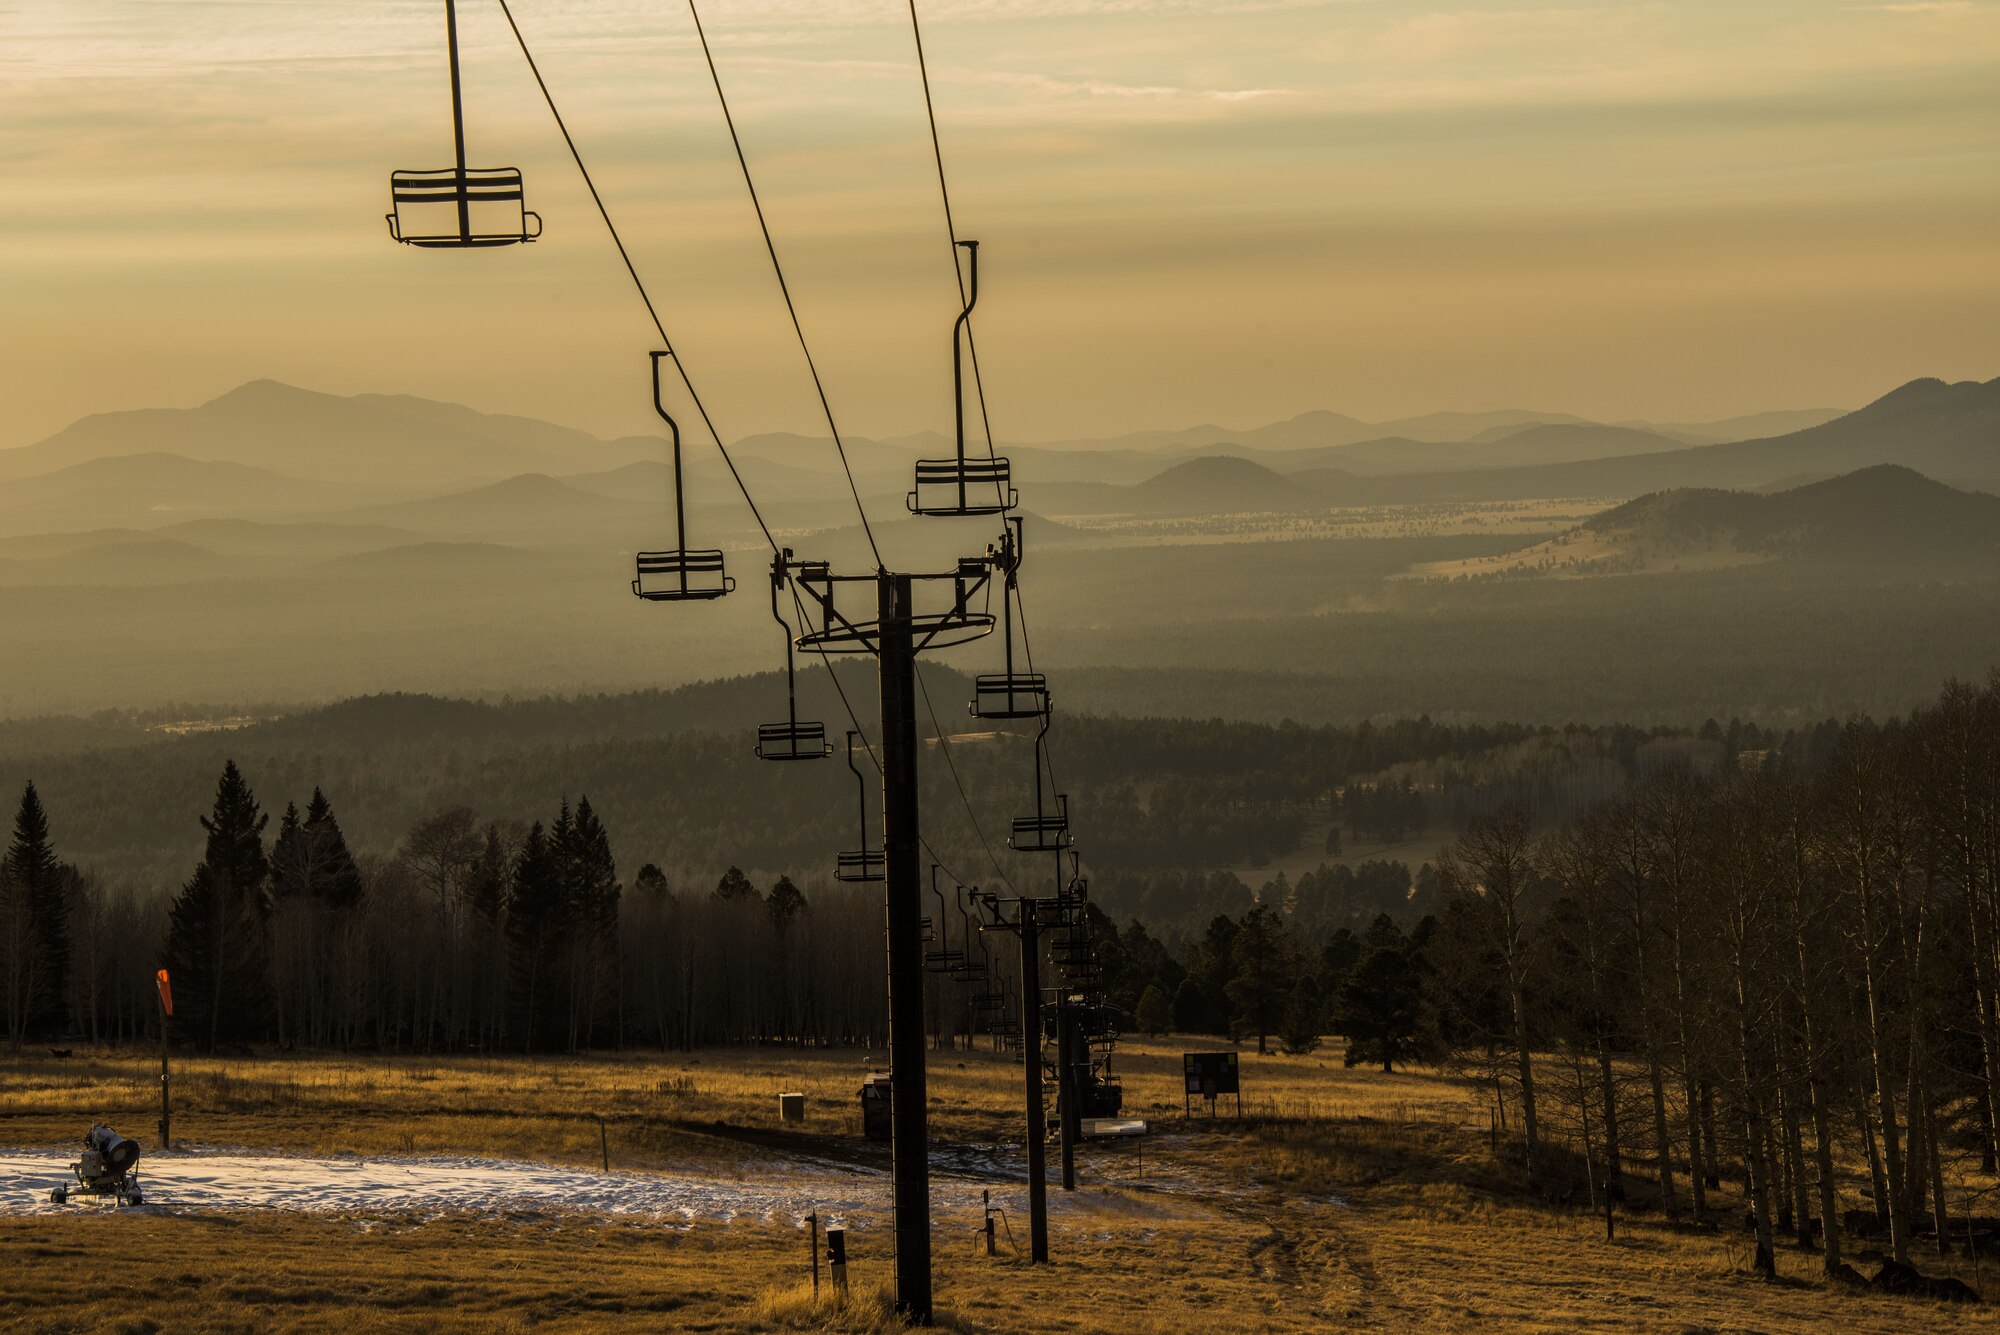 A ski lift at the Arizona Snowbowl overlooks the Coconino National Forest in Flagstaff Ariz., Dec. 16, 2017. The hills, lakes, and cliffs throughout the National Forest region offer numerous opportunities for hiking, biking, fishing, kayaking, and rock climbing for Airmen and their families visiting the Fort Tuthill Military Recreation Area. (U.S. Air Force photo/Airman 1st Class Caleb Worpel)